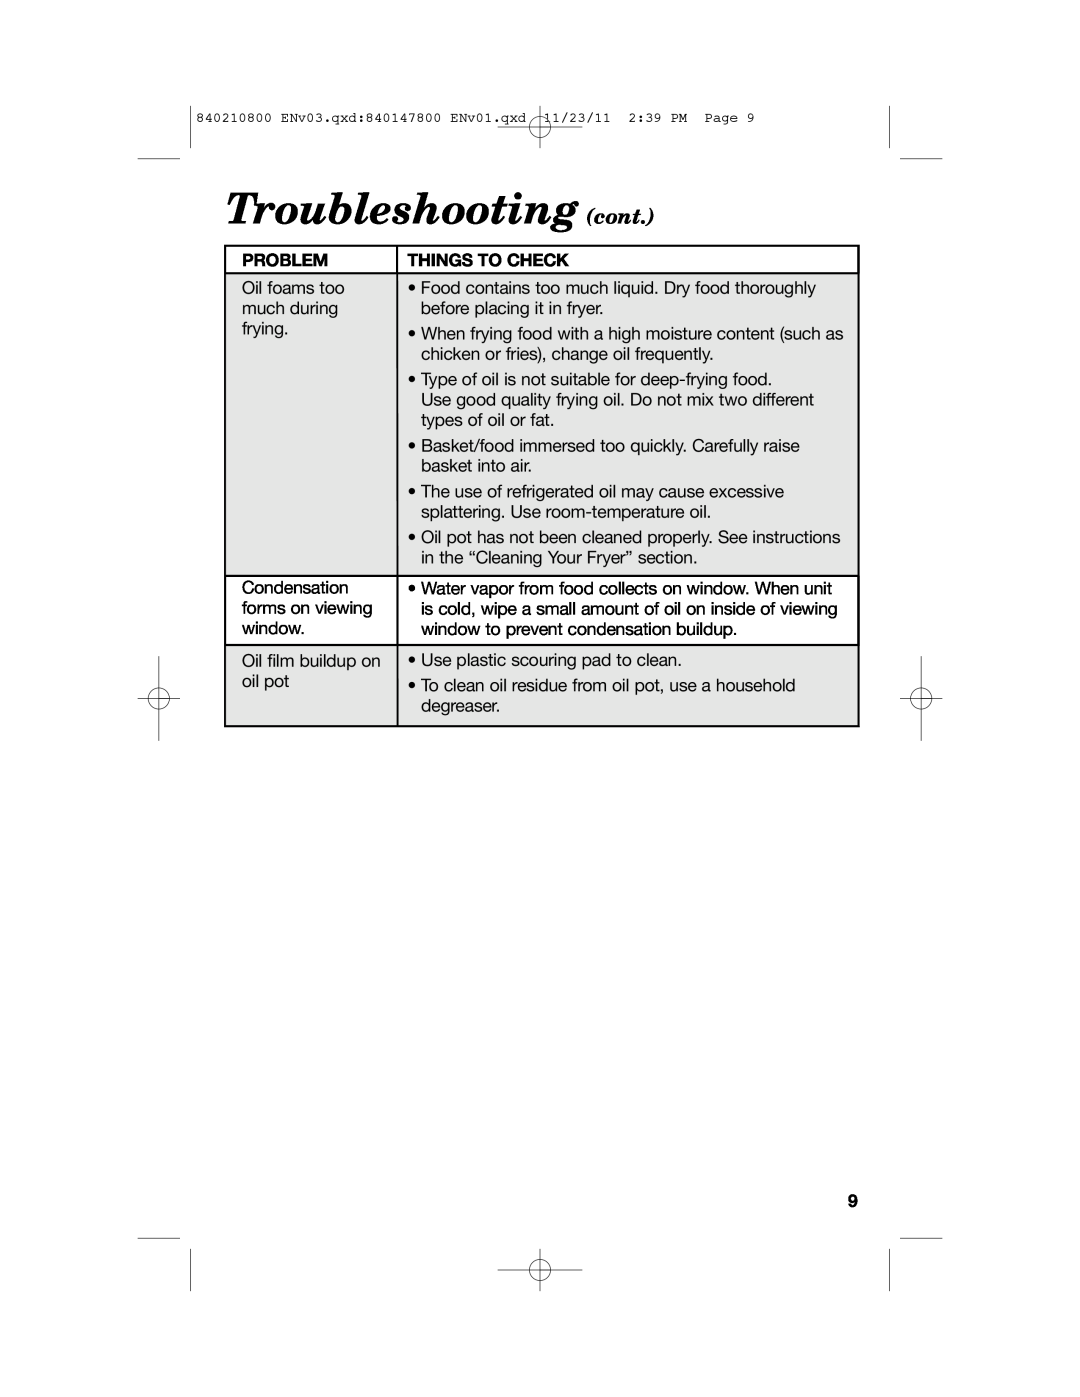 Hamilton Beach 35200 manual Troubleshooting cont, Problem, Things To Check 